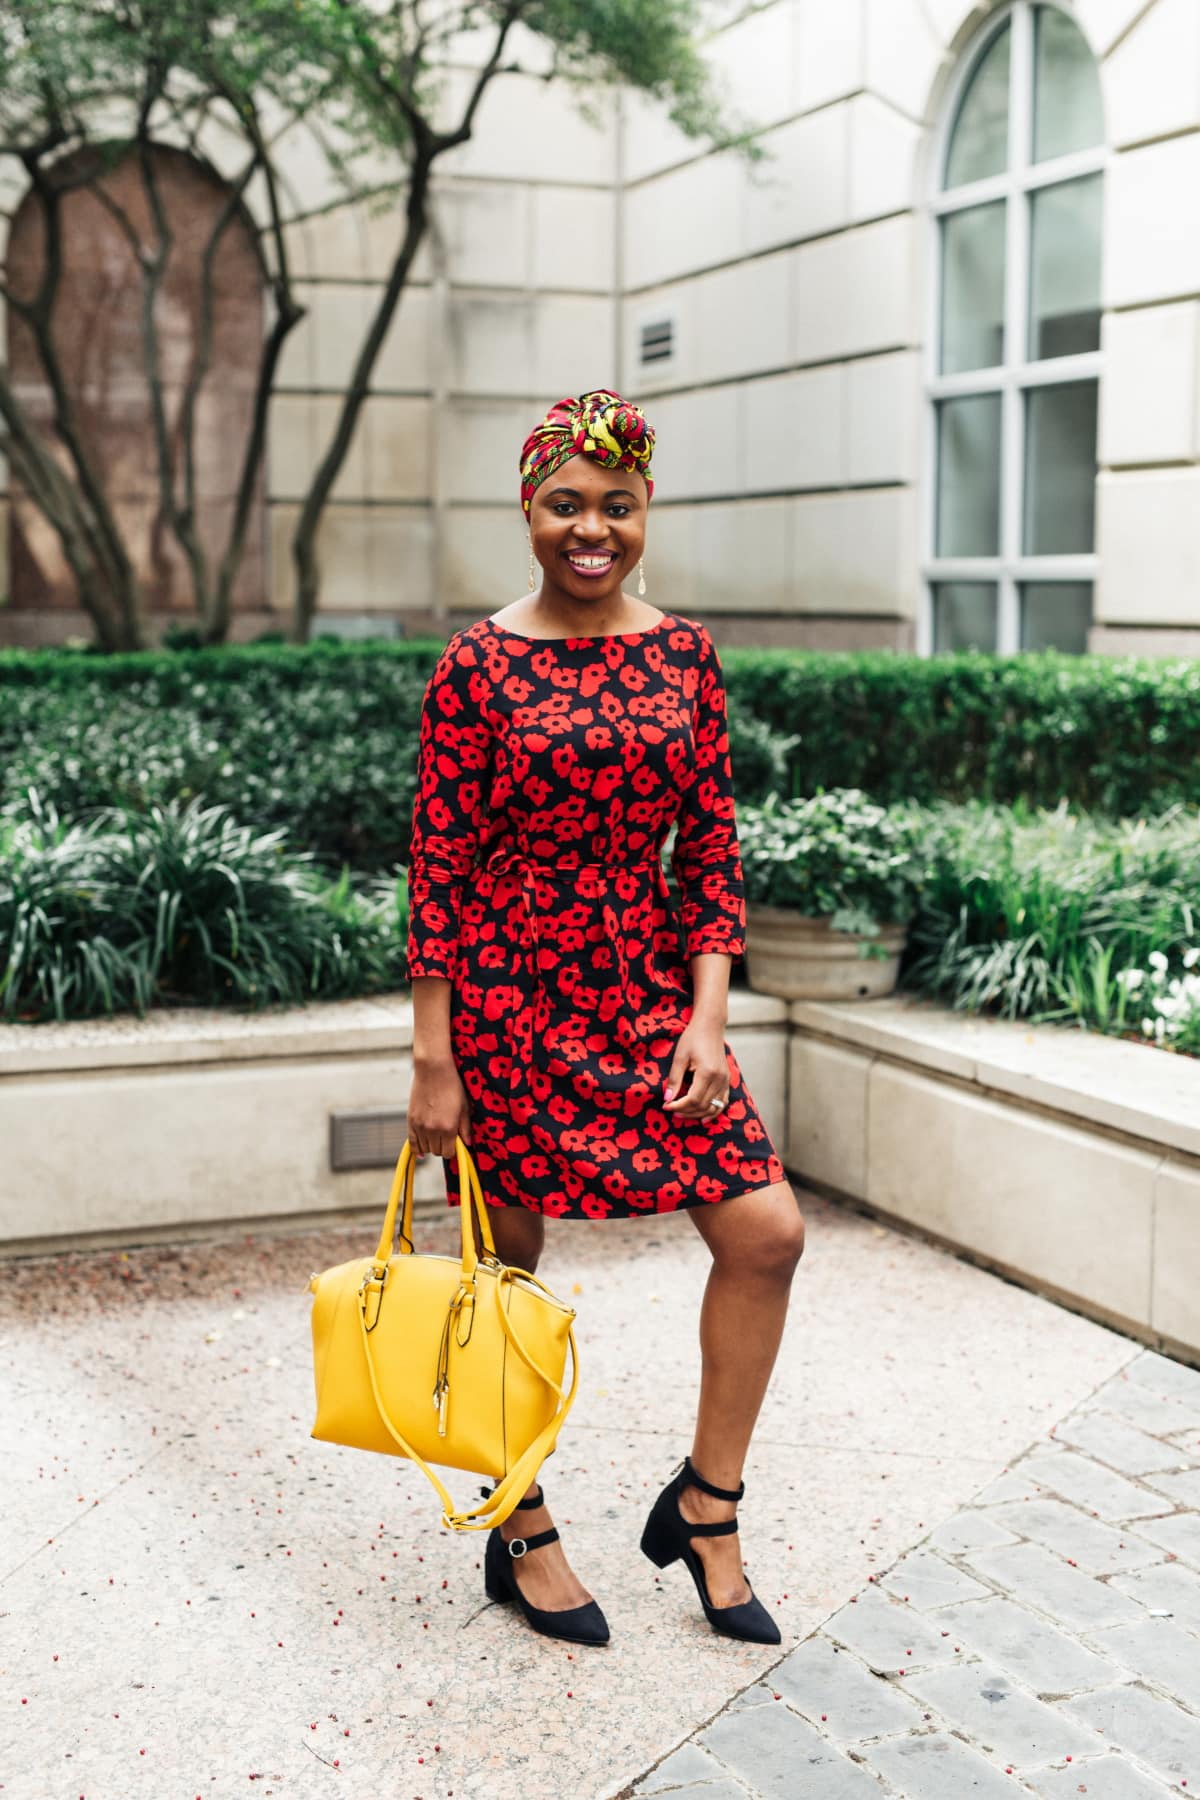 Crushing on this dazzling head wrap outfit espexxially with how she paired that African print turban with a cute summer dress. An unlikely combination that works perfect for the office, school, brunch, church, and even weddings. Plus it’s an effortless style on bad hair days. #africanfashionstyles #ankara #dashiki #headwraps